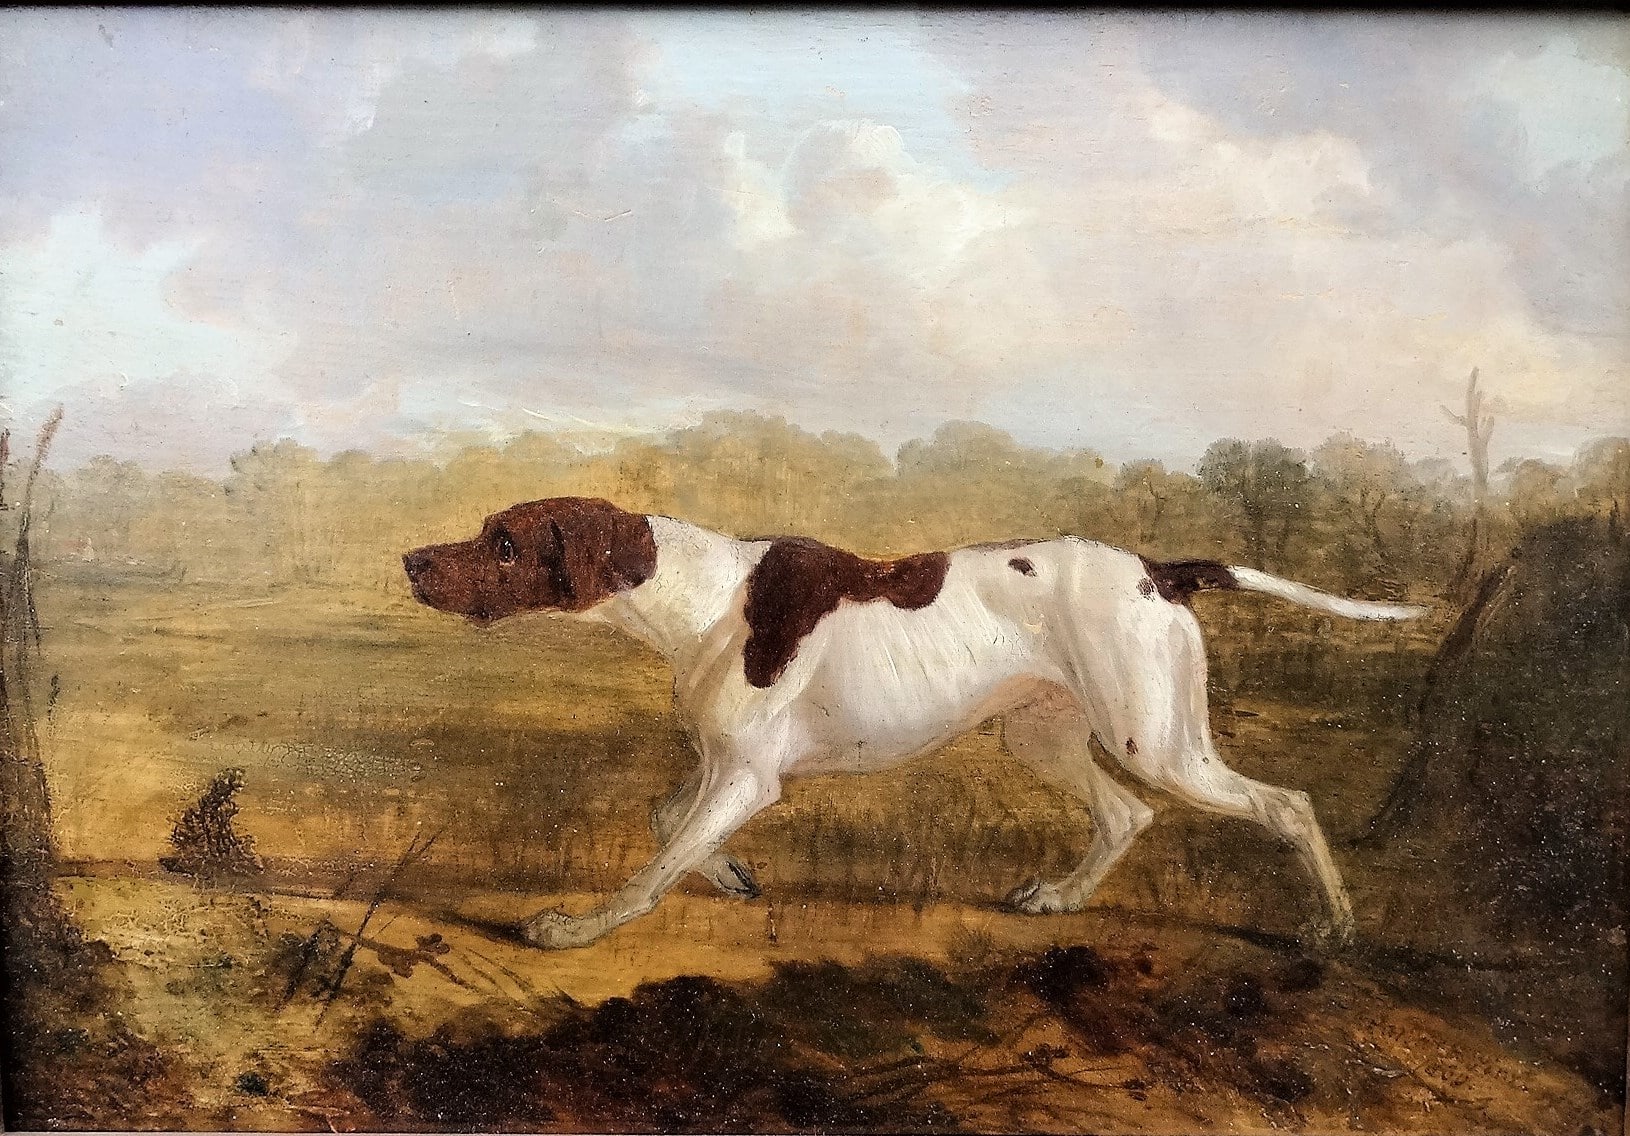 Hancock's Hunting Dog. The dog points to a target out of frame. The background is a forested marsh.